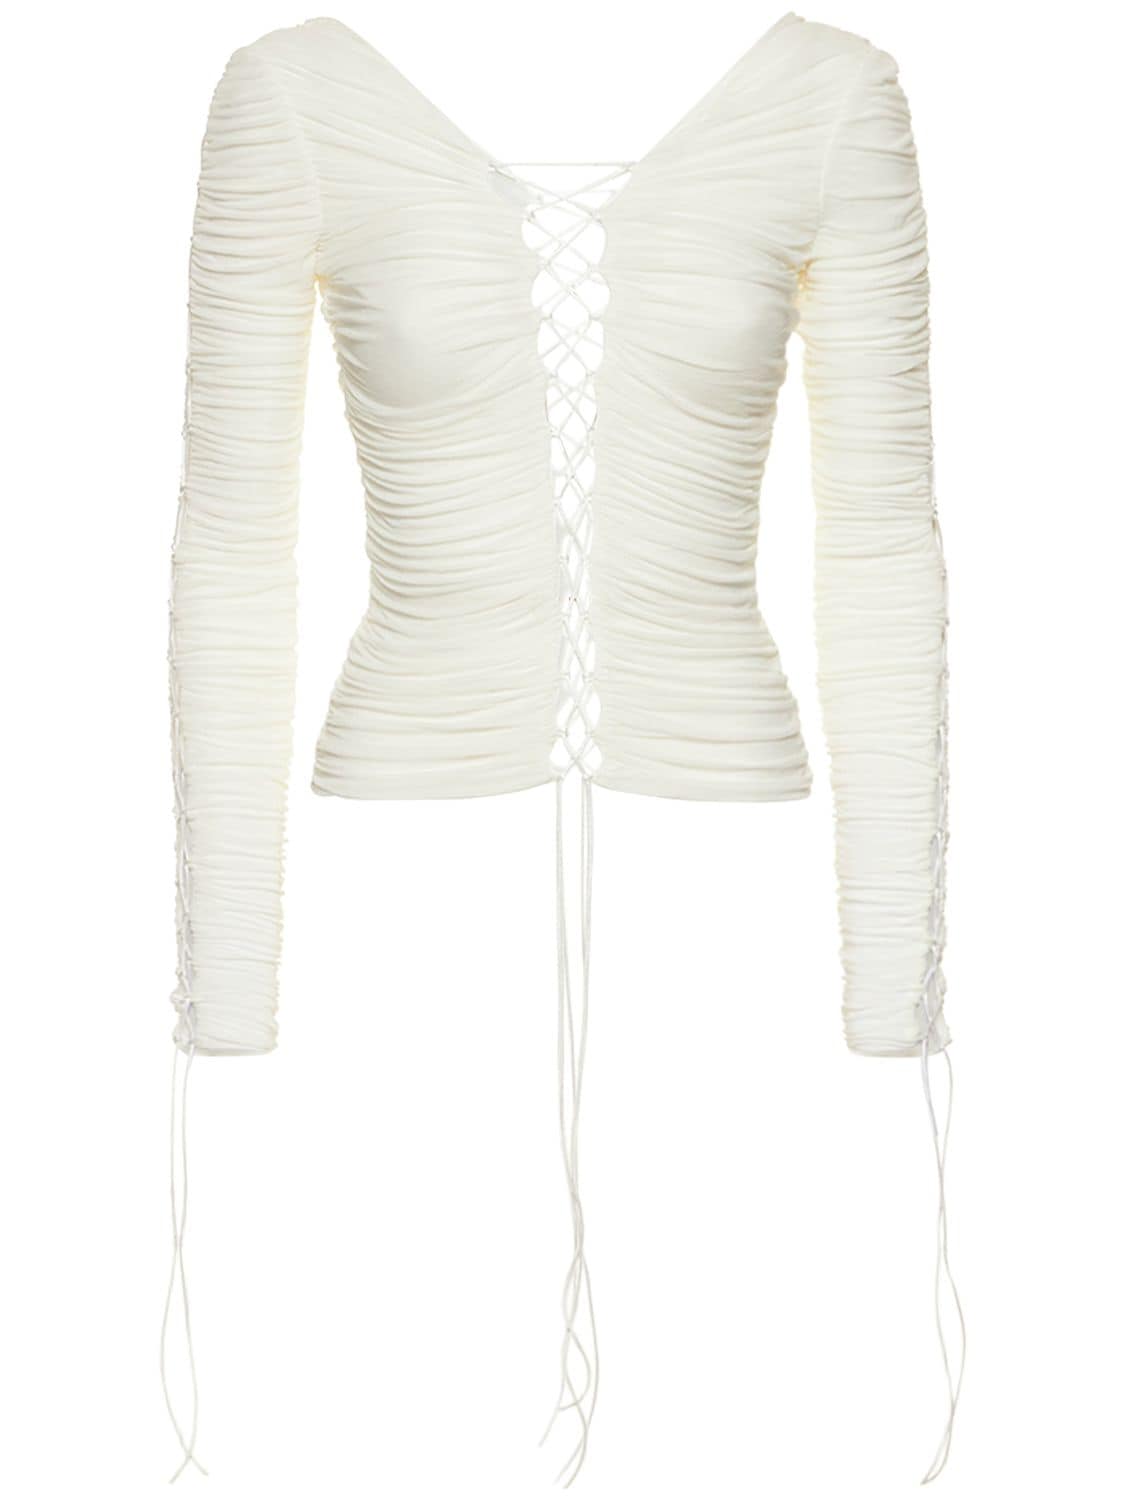 The Knit Viscose Top – WOMEN > CLOTHING > TOPS